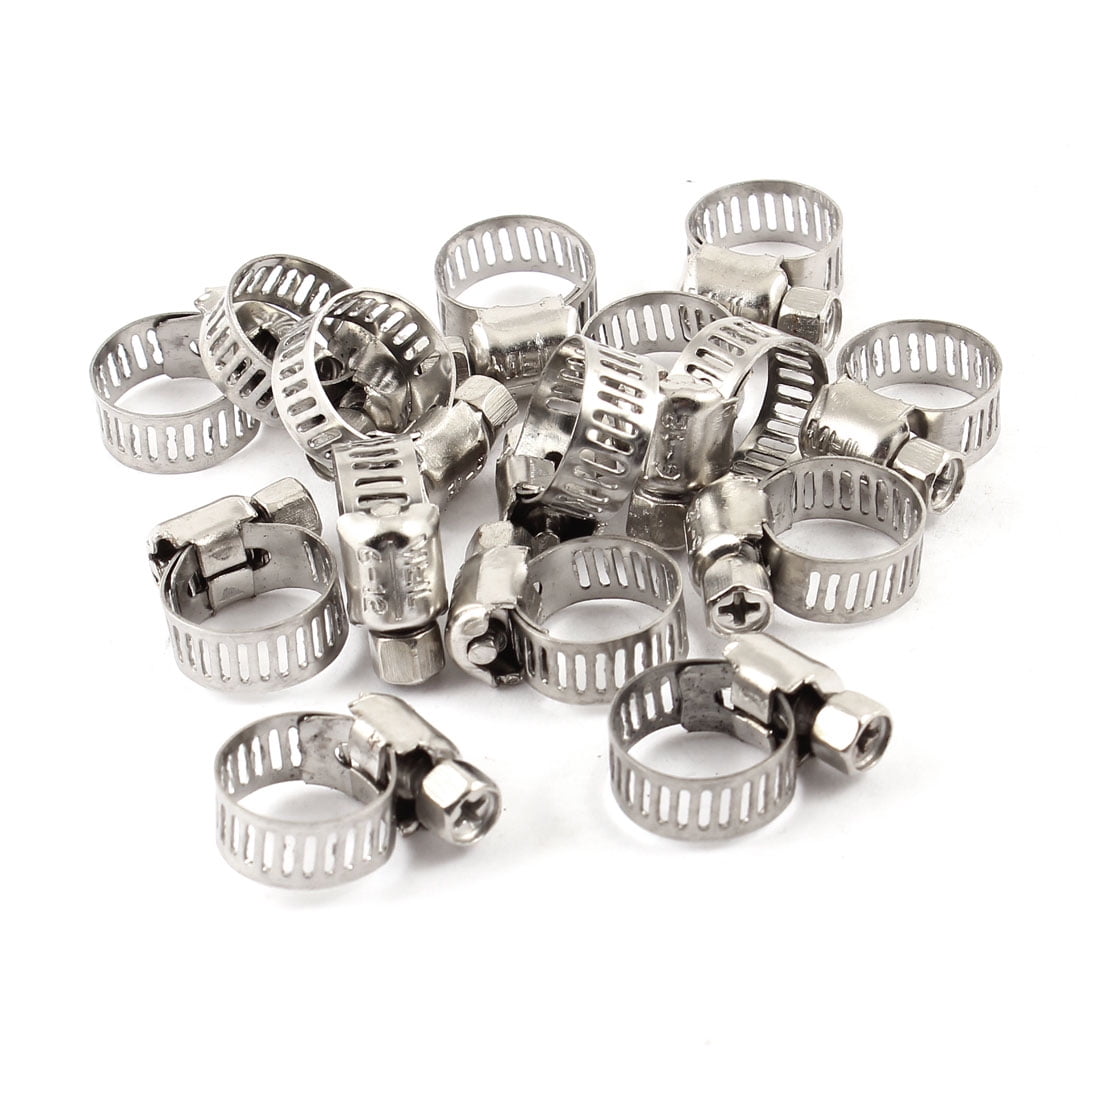 6-12mm Adjustable Stainless Steel Worm Gear Hose Clamps 